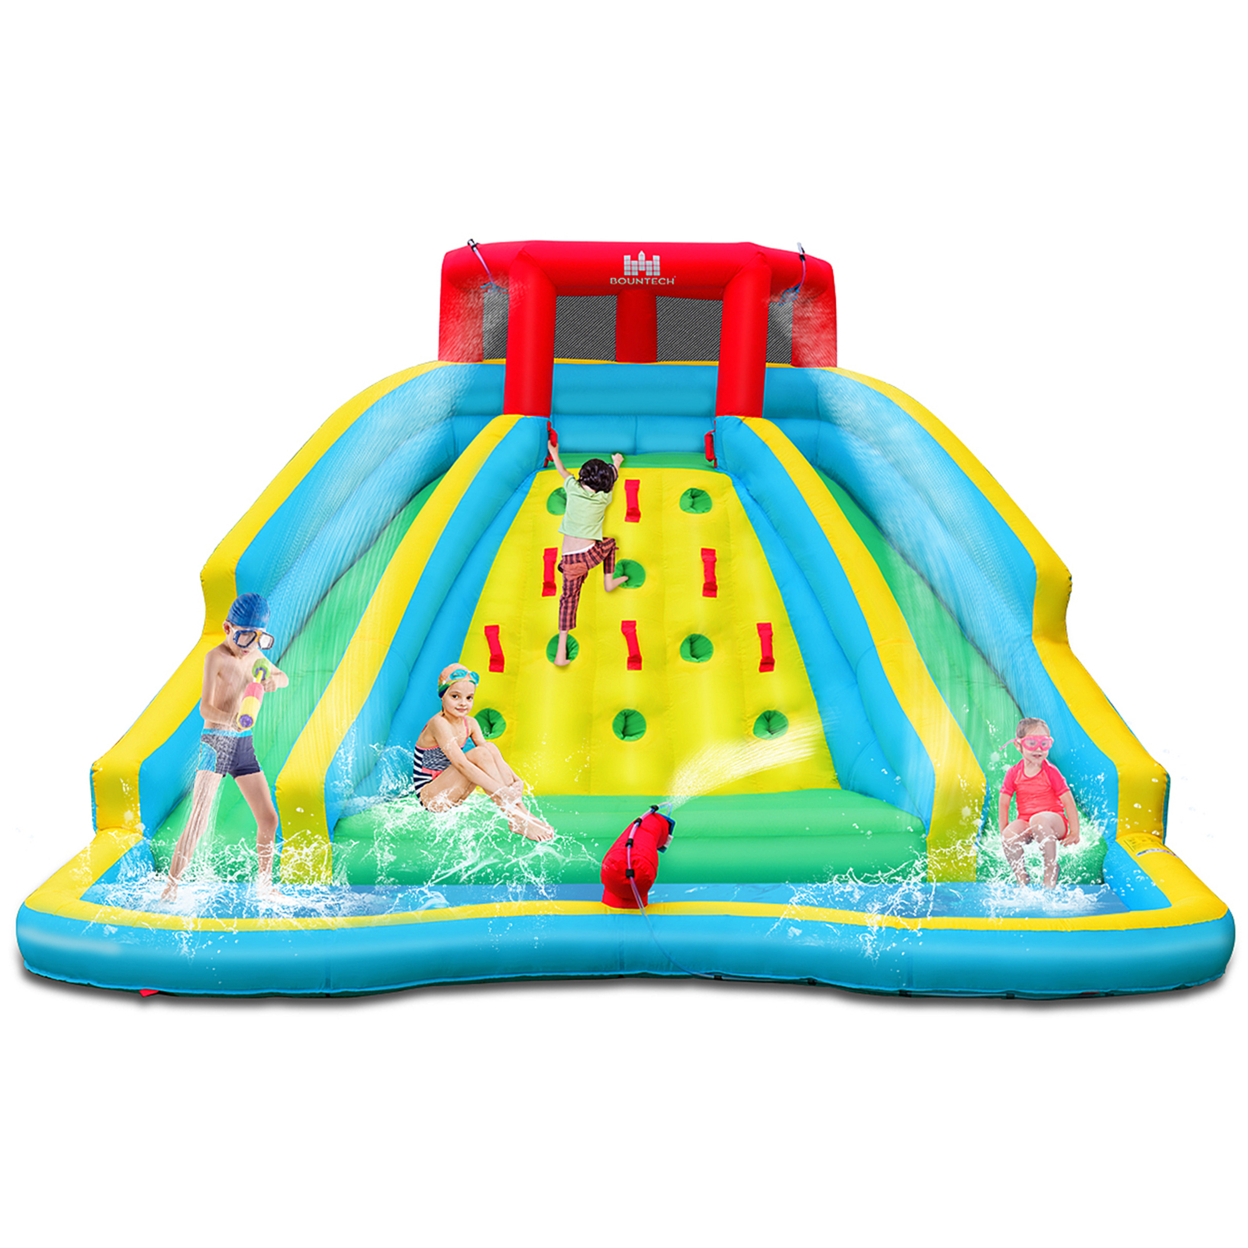 Inflatable Mighty Water Slide Park Bounce Splash Pool Without Blower